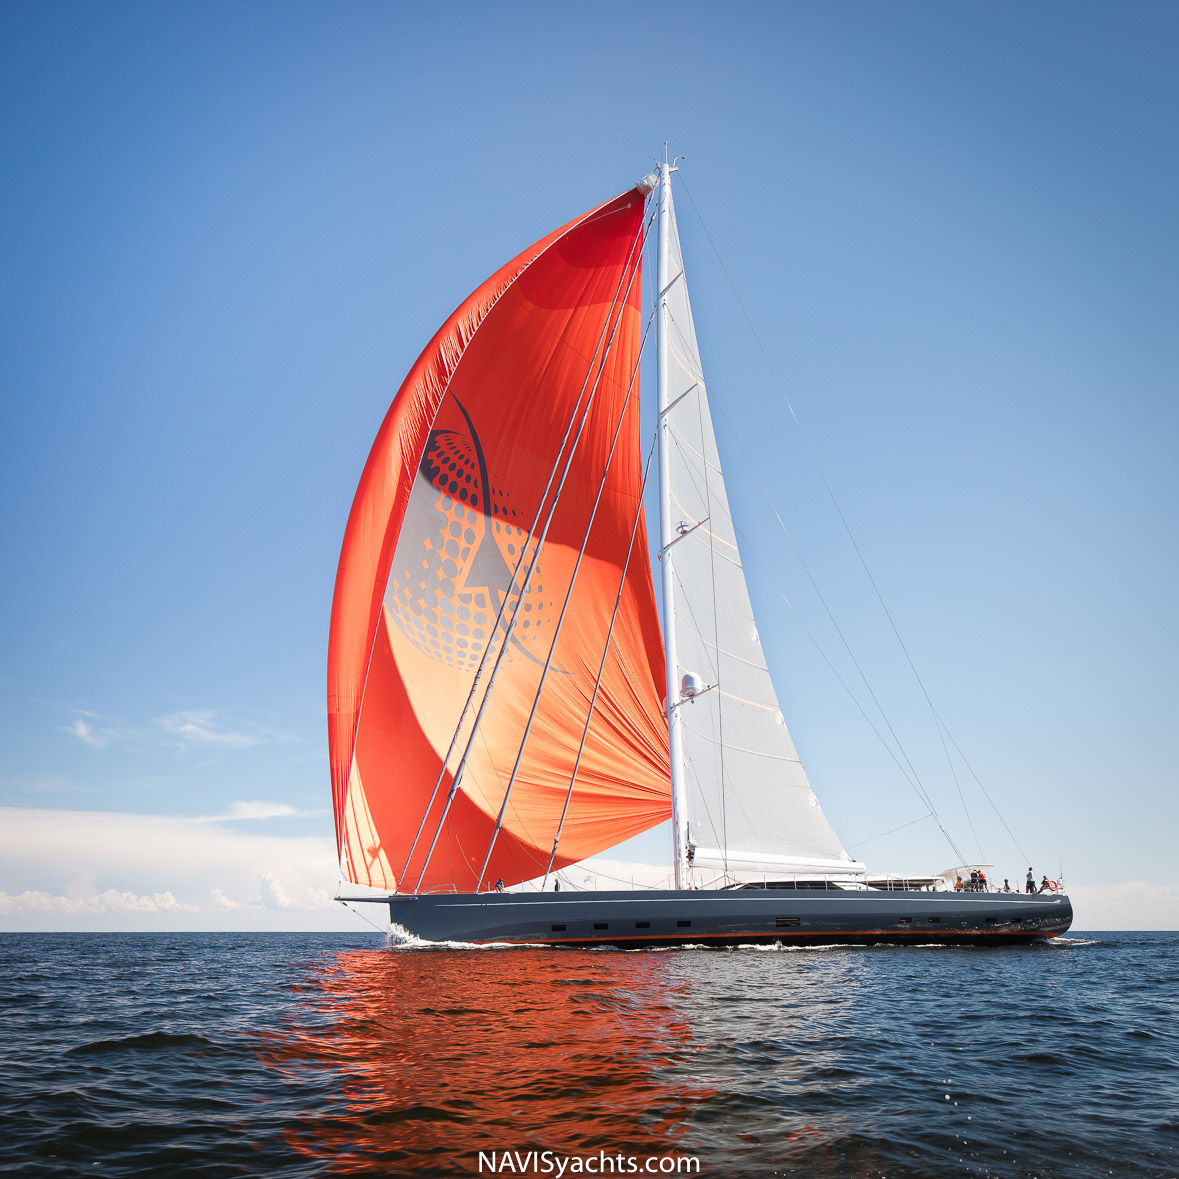 Baltic superyacht Path review, owner